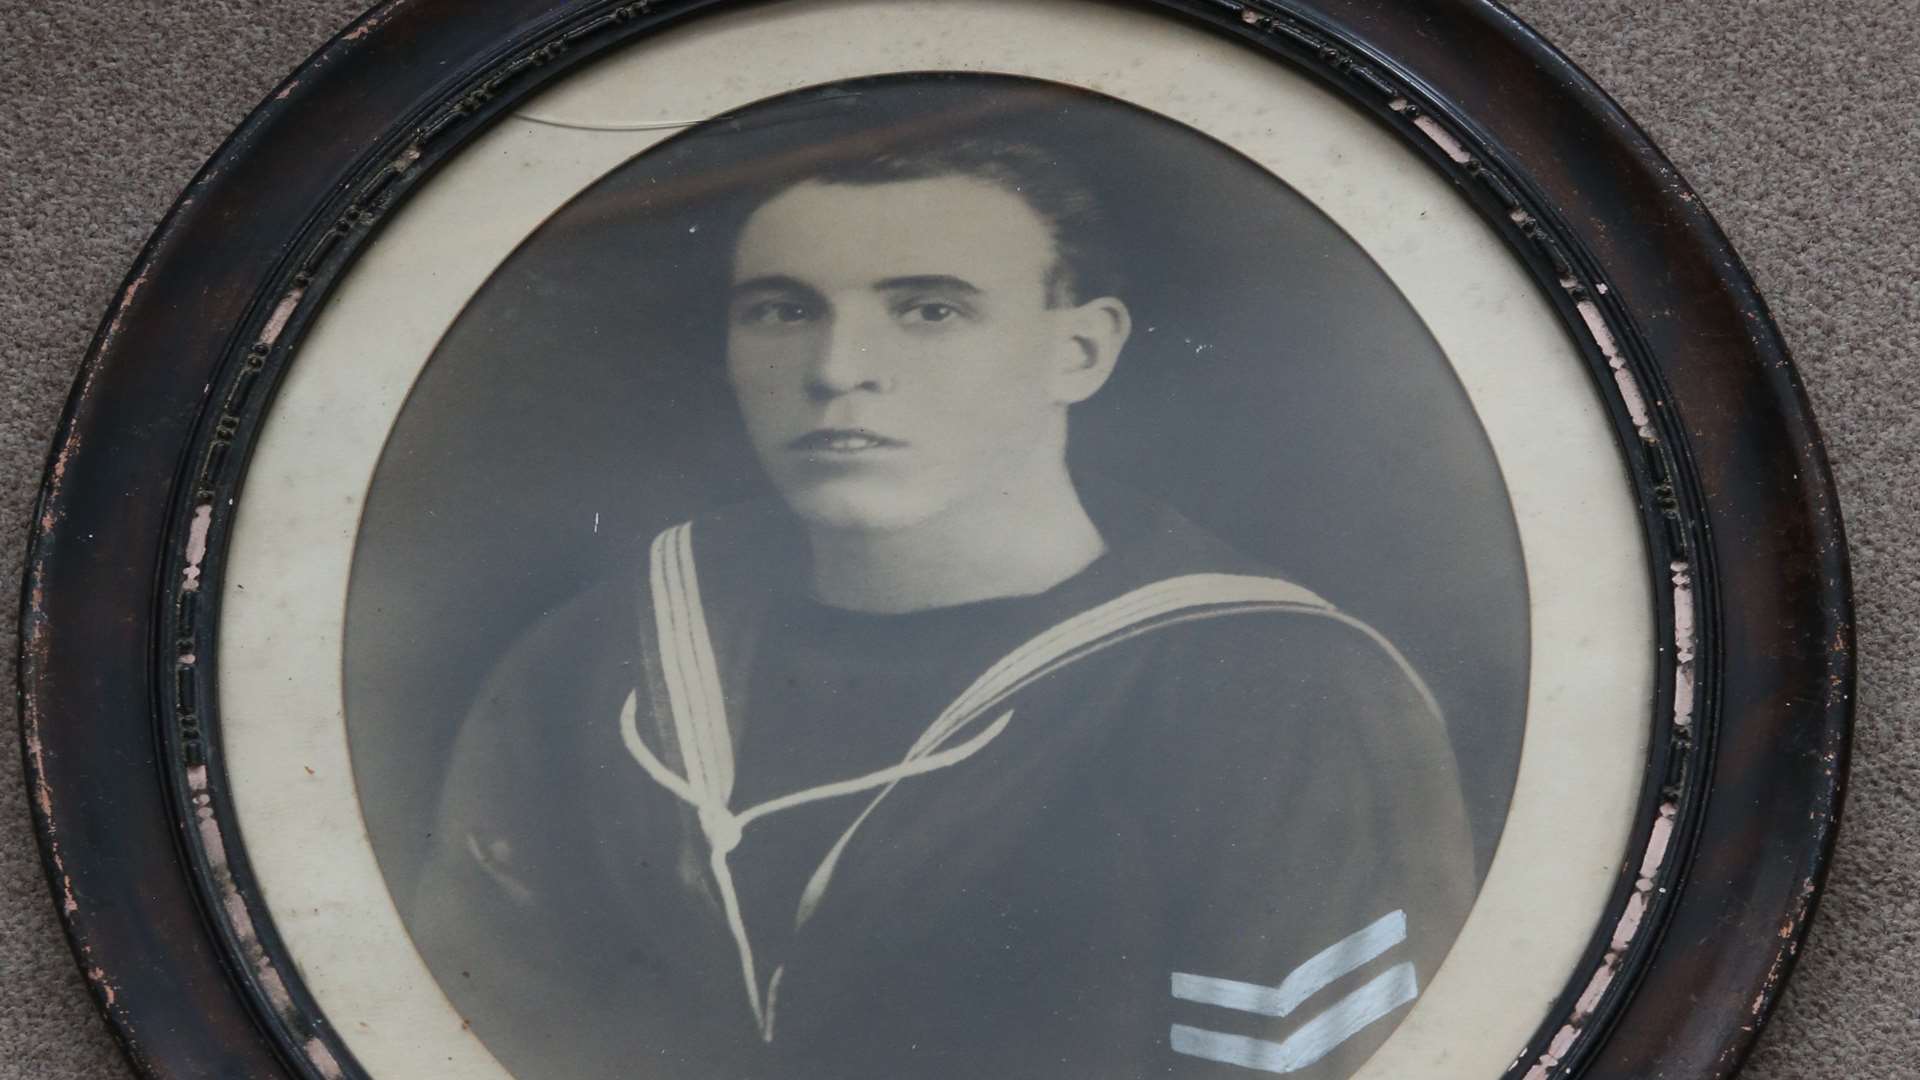 Do you recognise this sailor depicted in this framed portrait found hidden under floorboards?